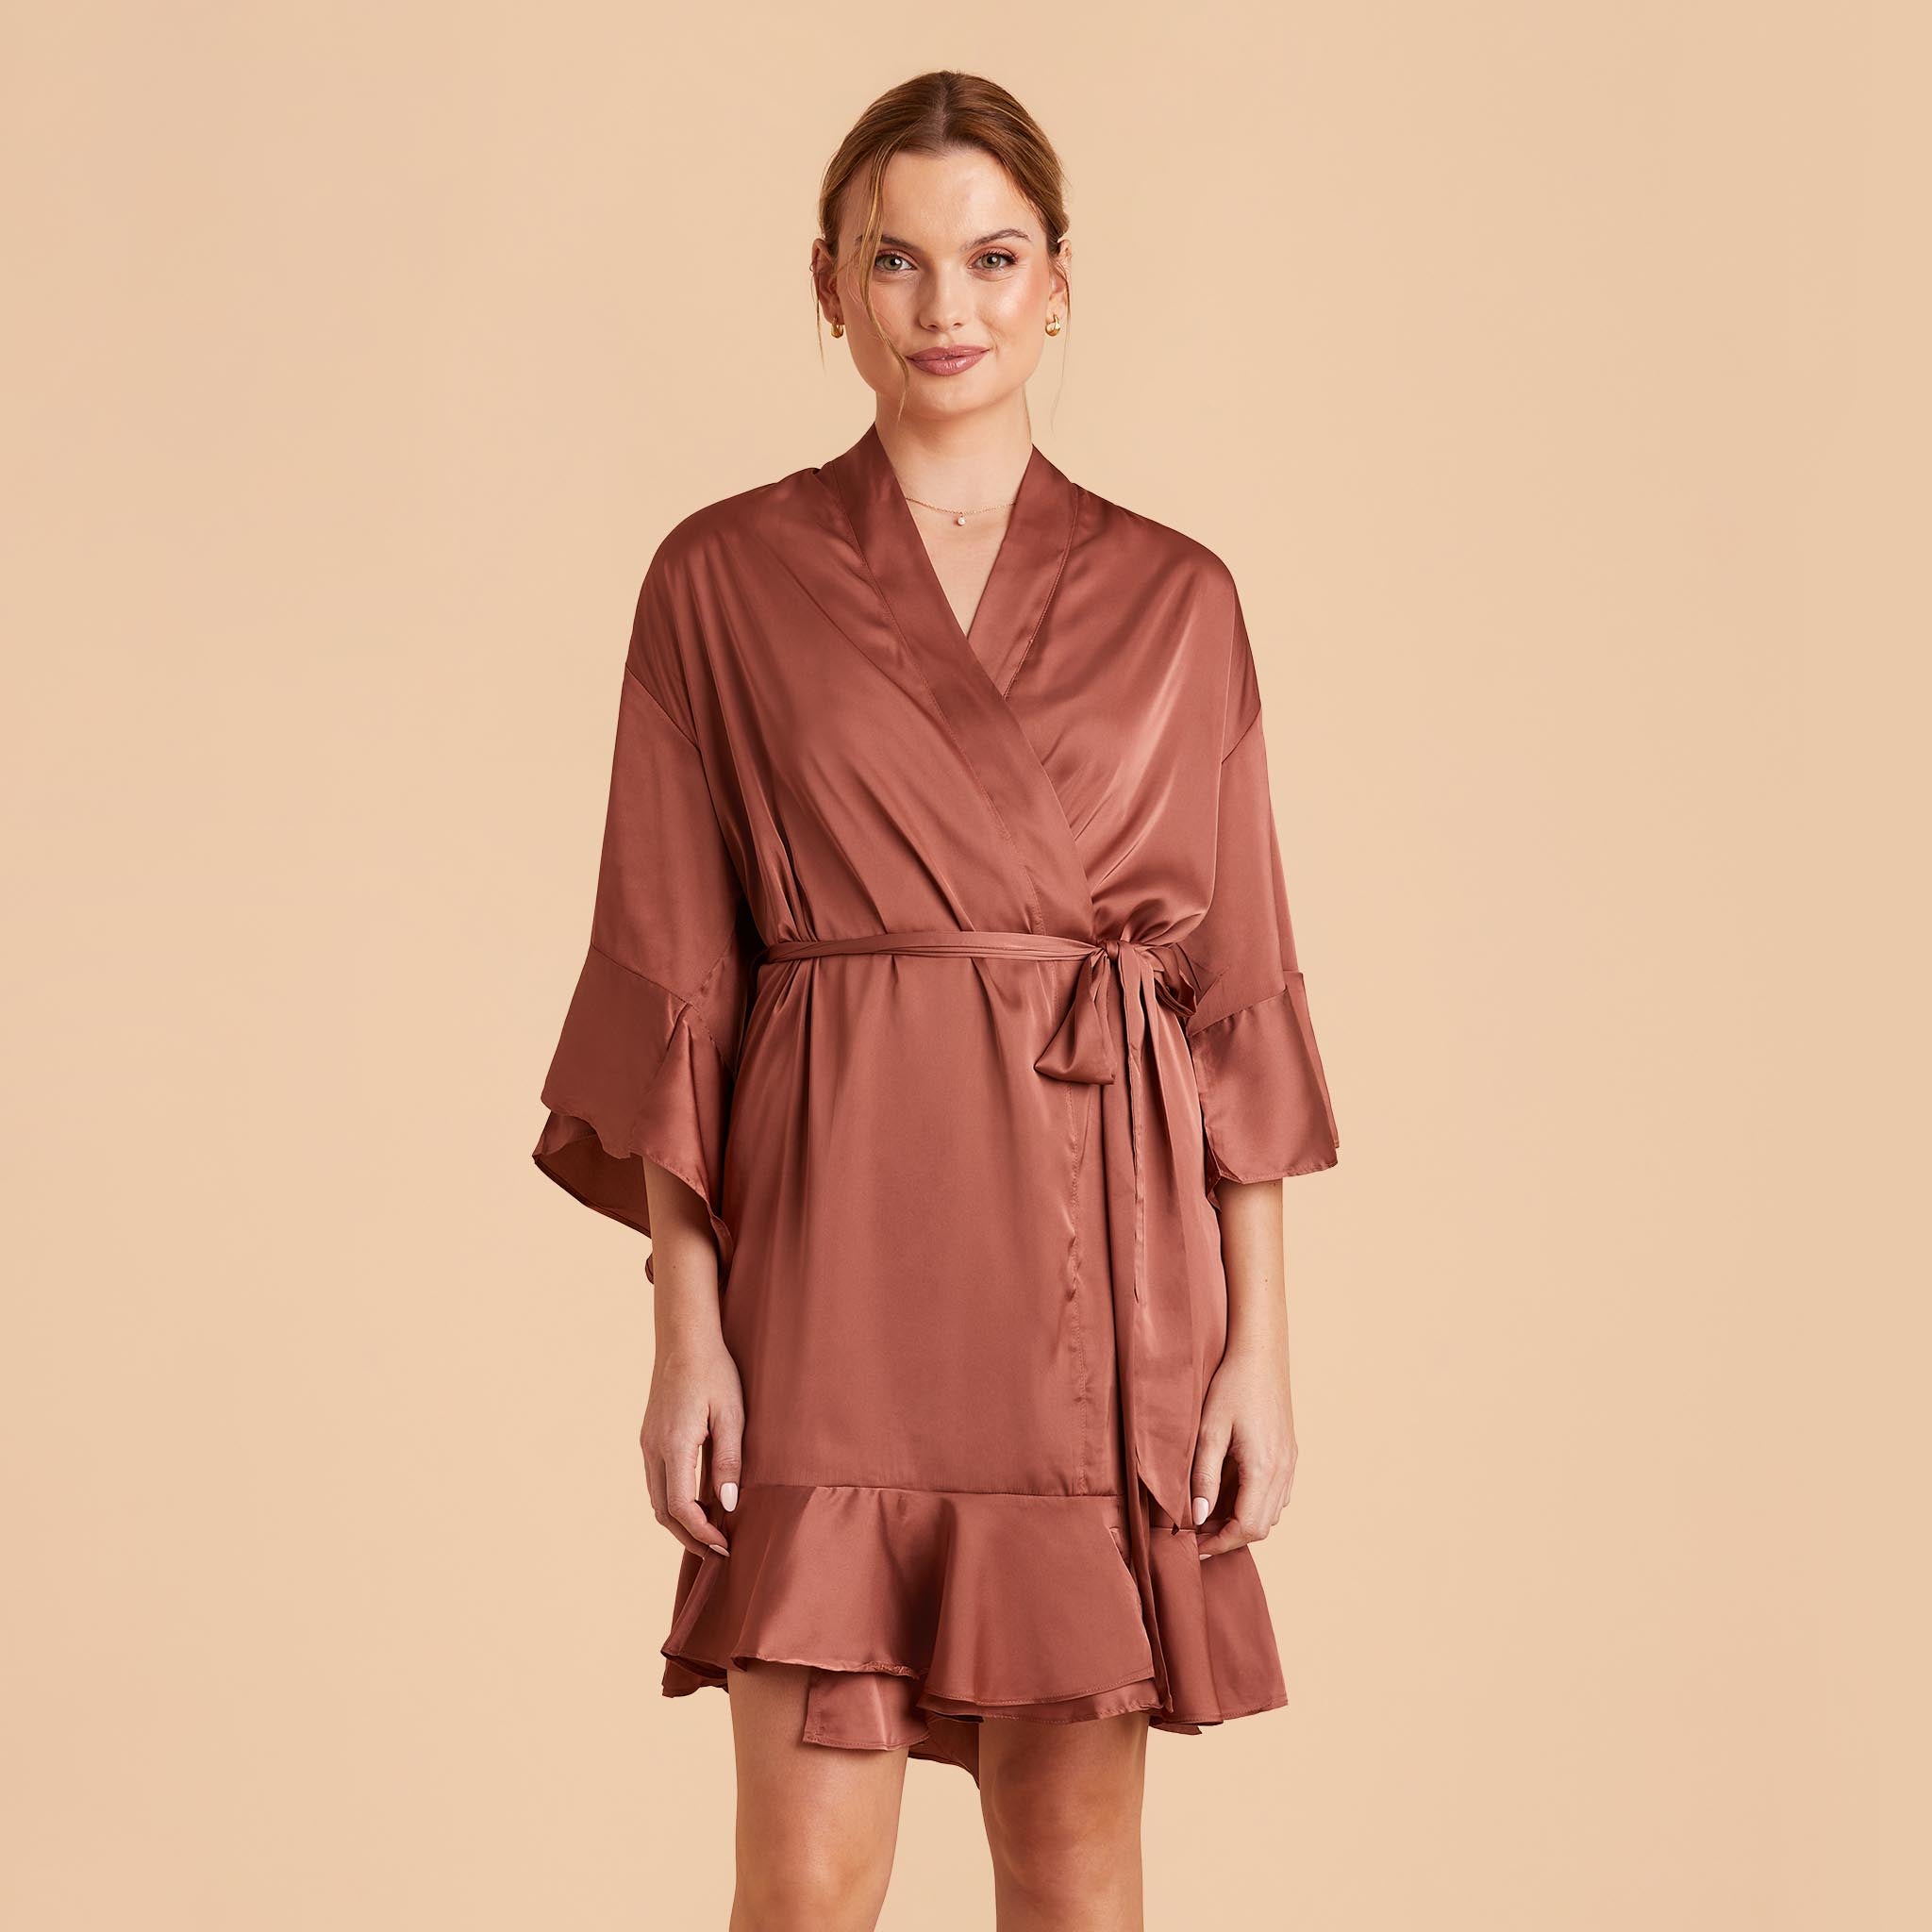 Kenny Ruffle Robe in desert rose satin by Birdy Grey, front view